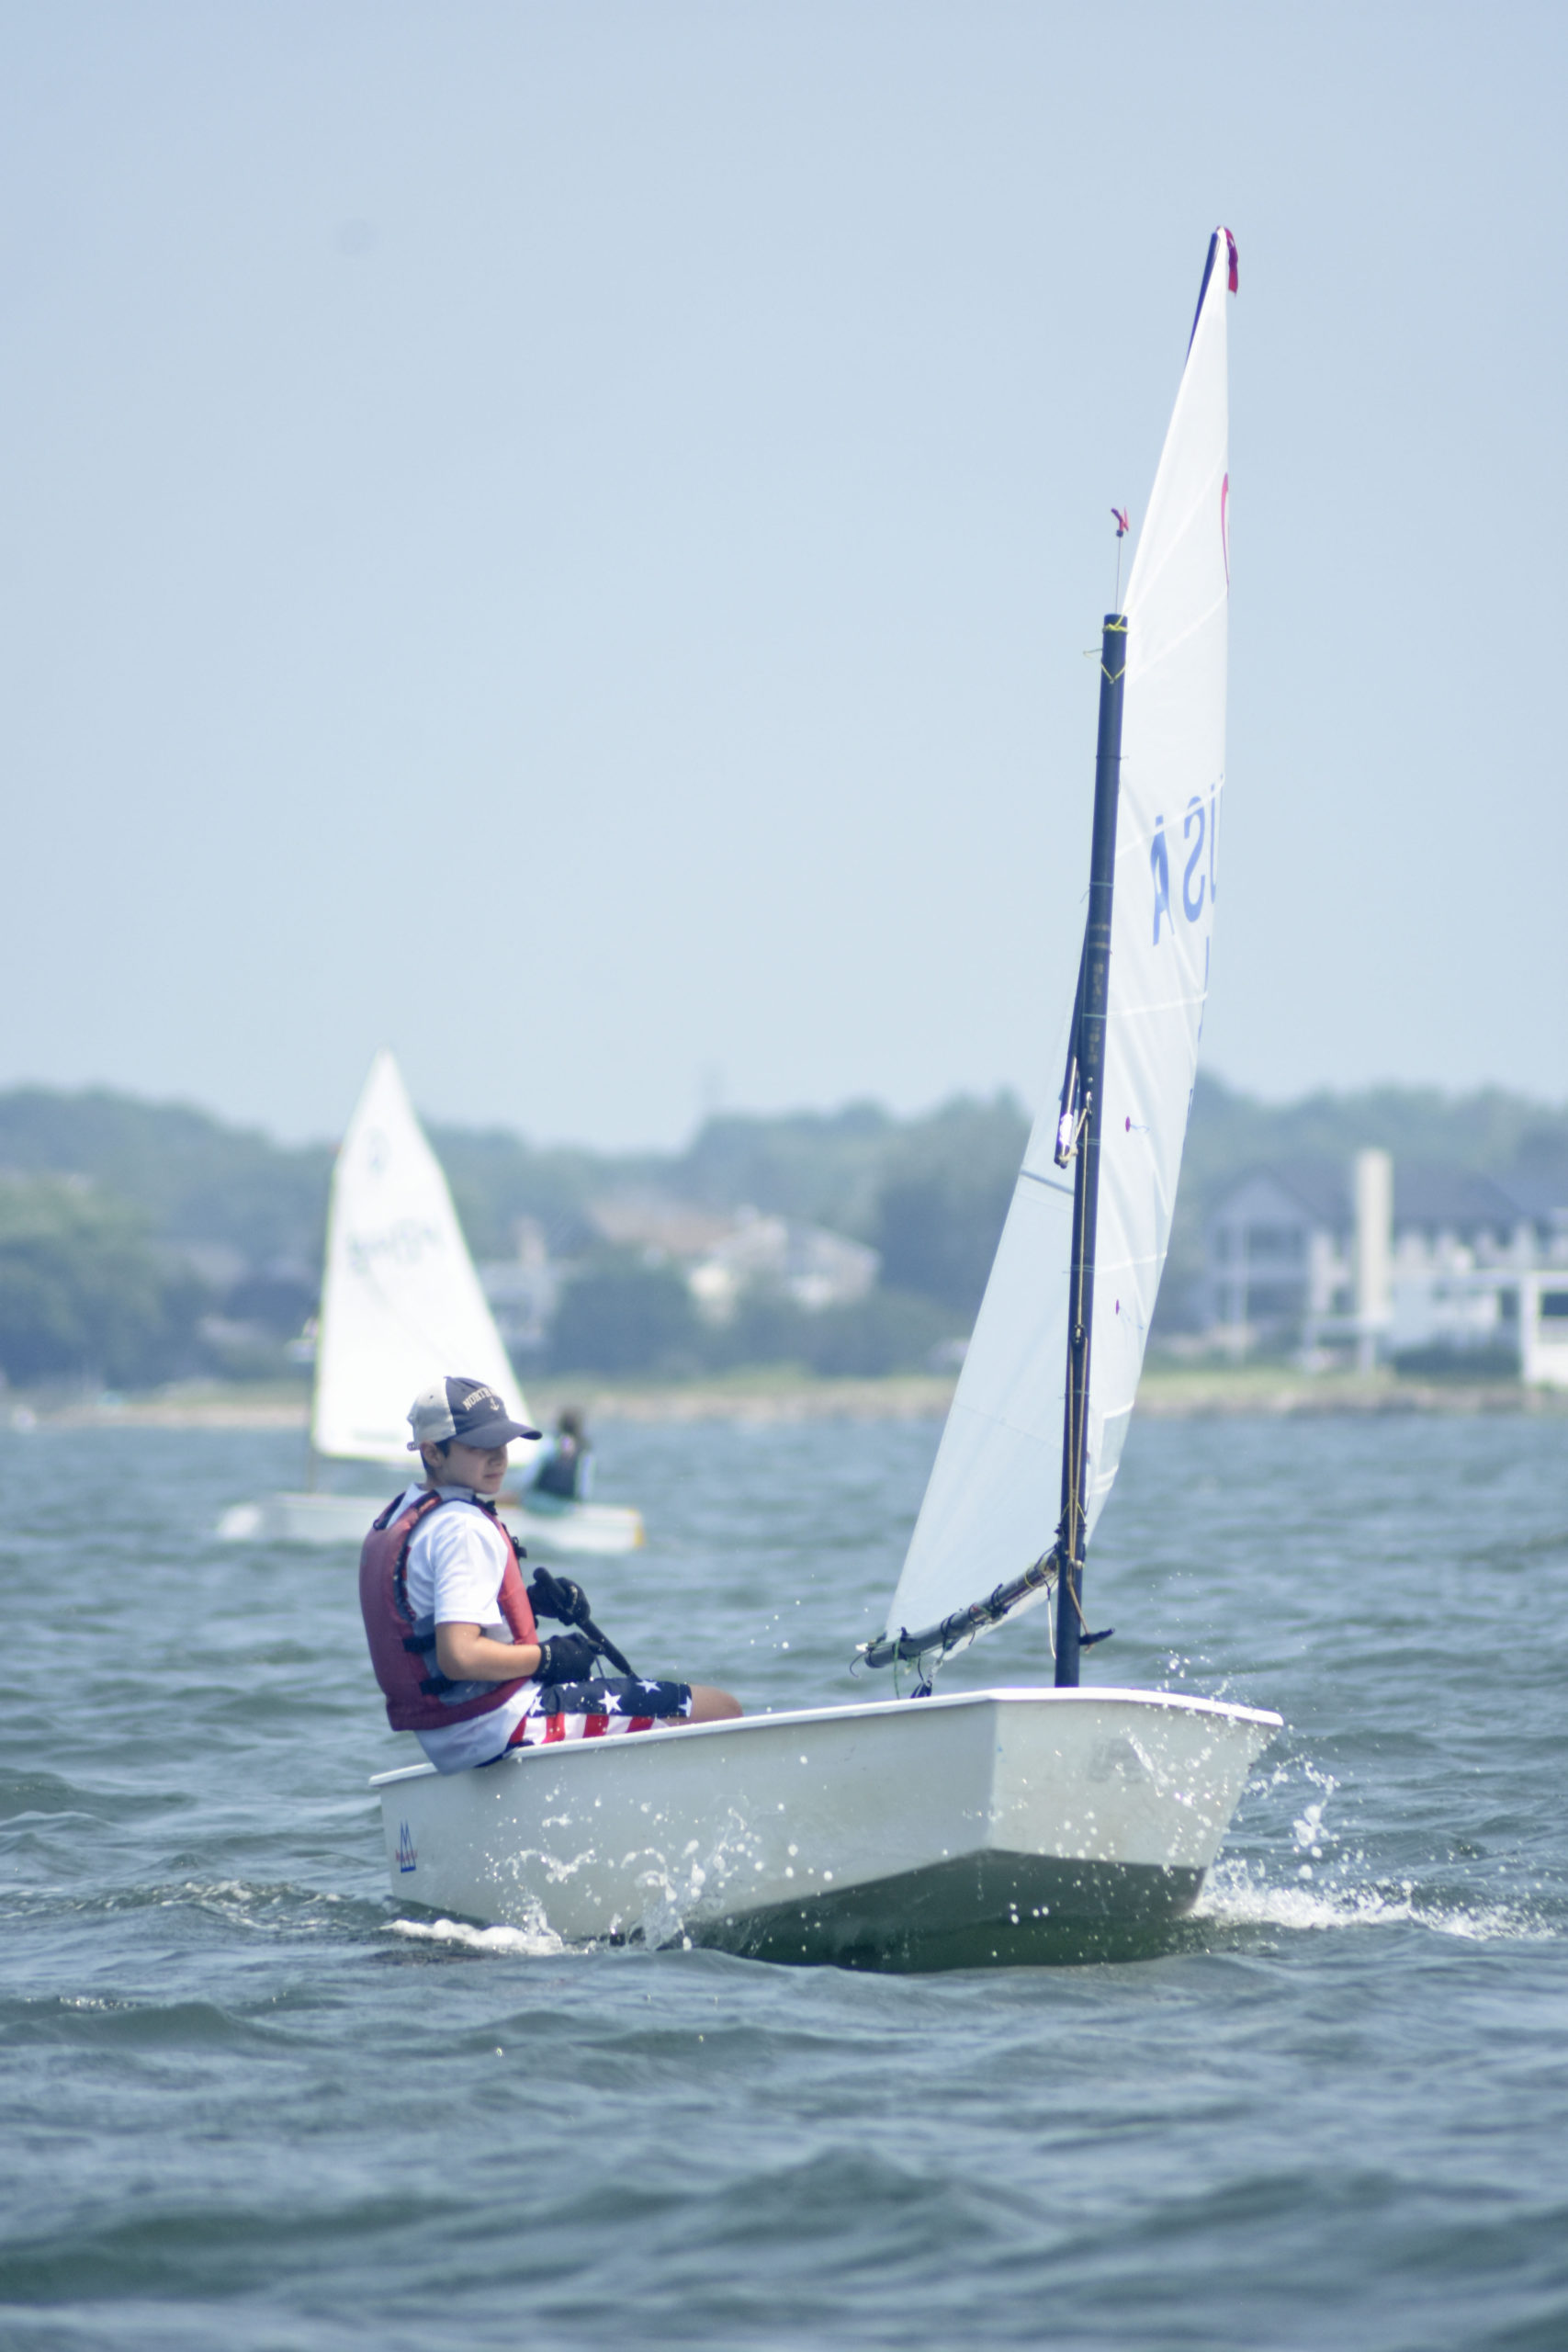 Everett Lehnert of Old Cove Yacht Club in New Suffolk, who went on to win the blue fleet.